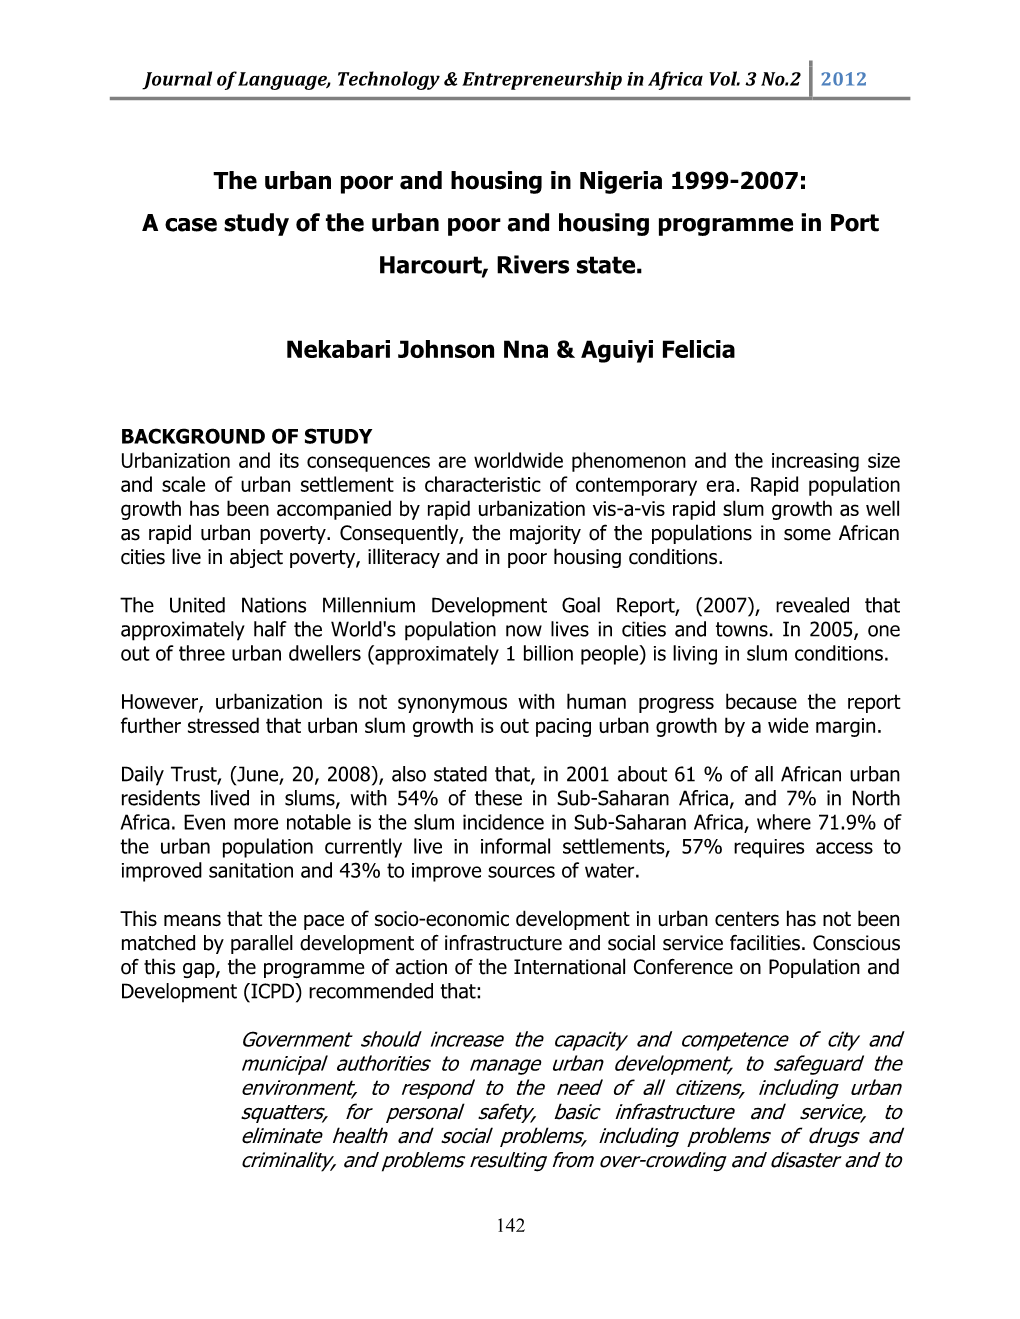 The Urban Poor and Housing in Nigeria 1999-2007: a Case Study of the Urban Poor and Housing Programme in Port Harcourt, Rivers State